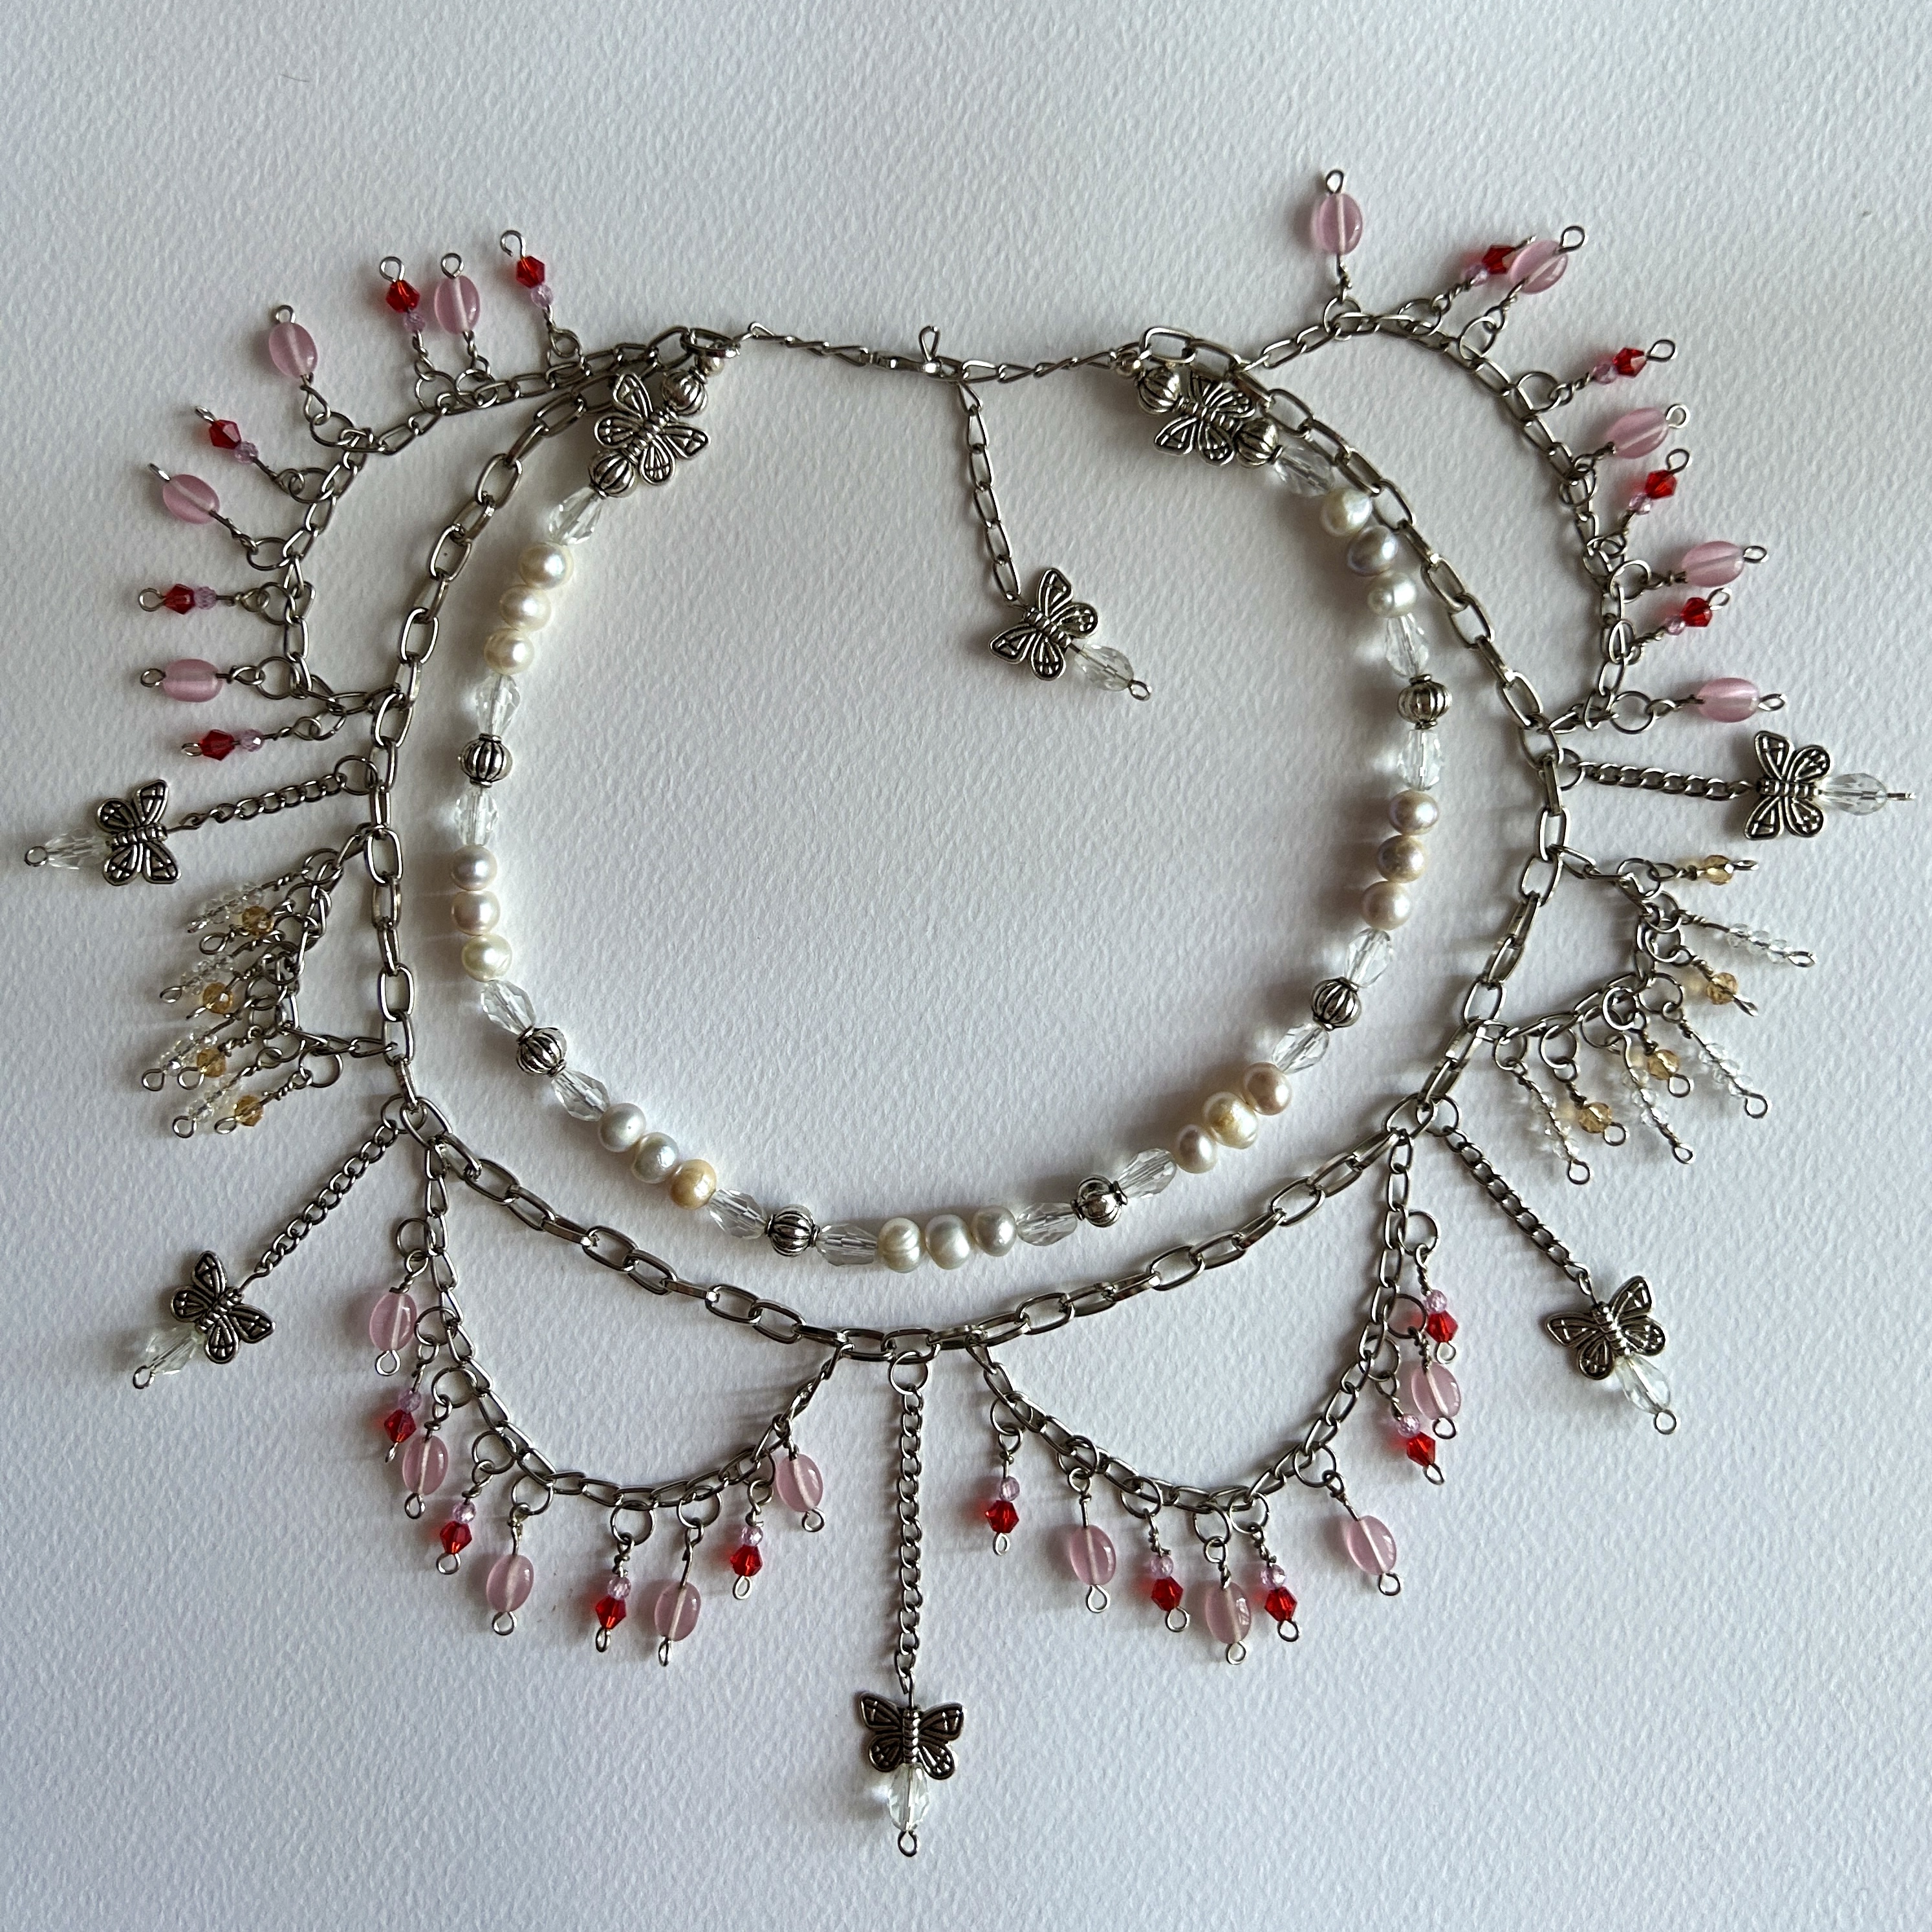 tiered beaded necklace with red and pink glass beads